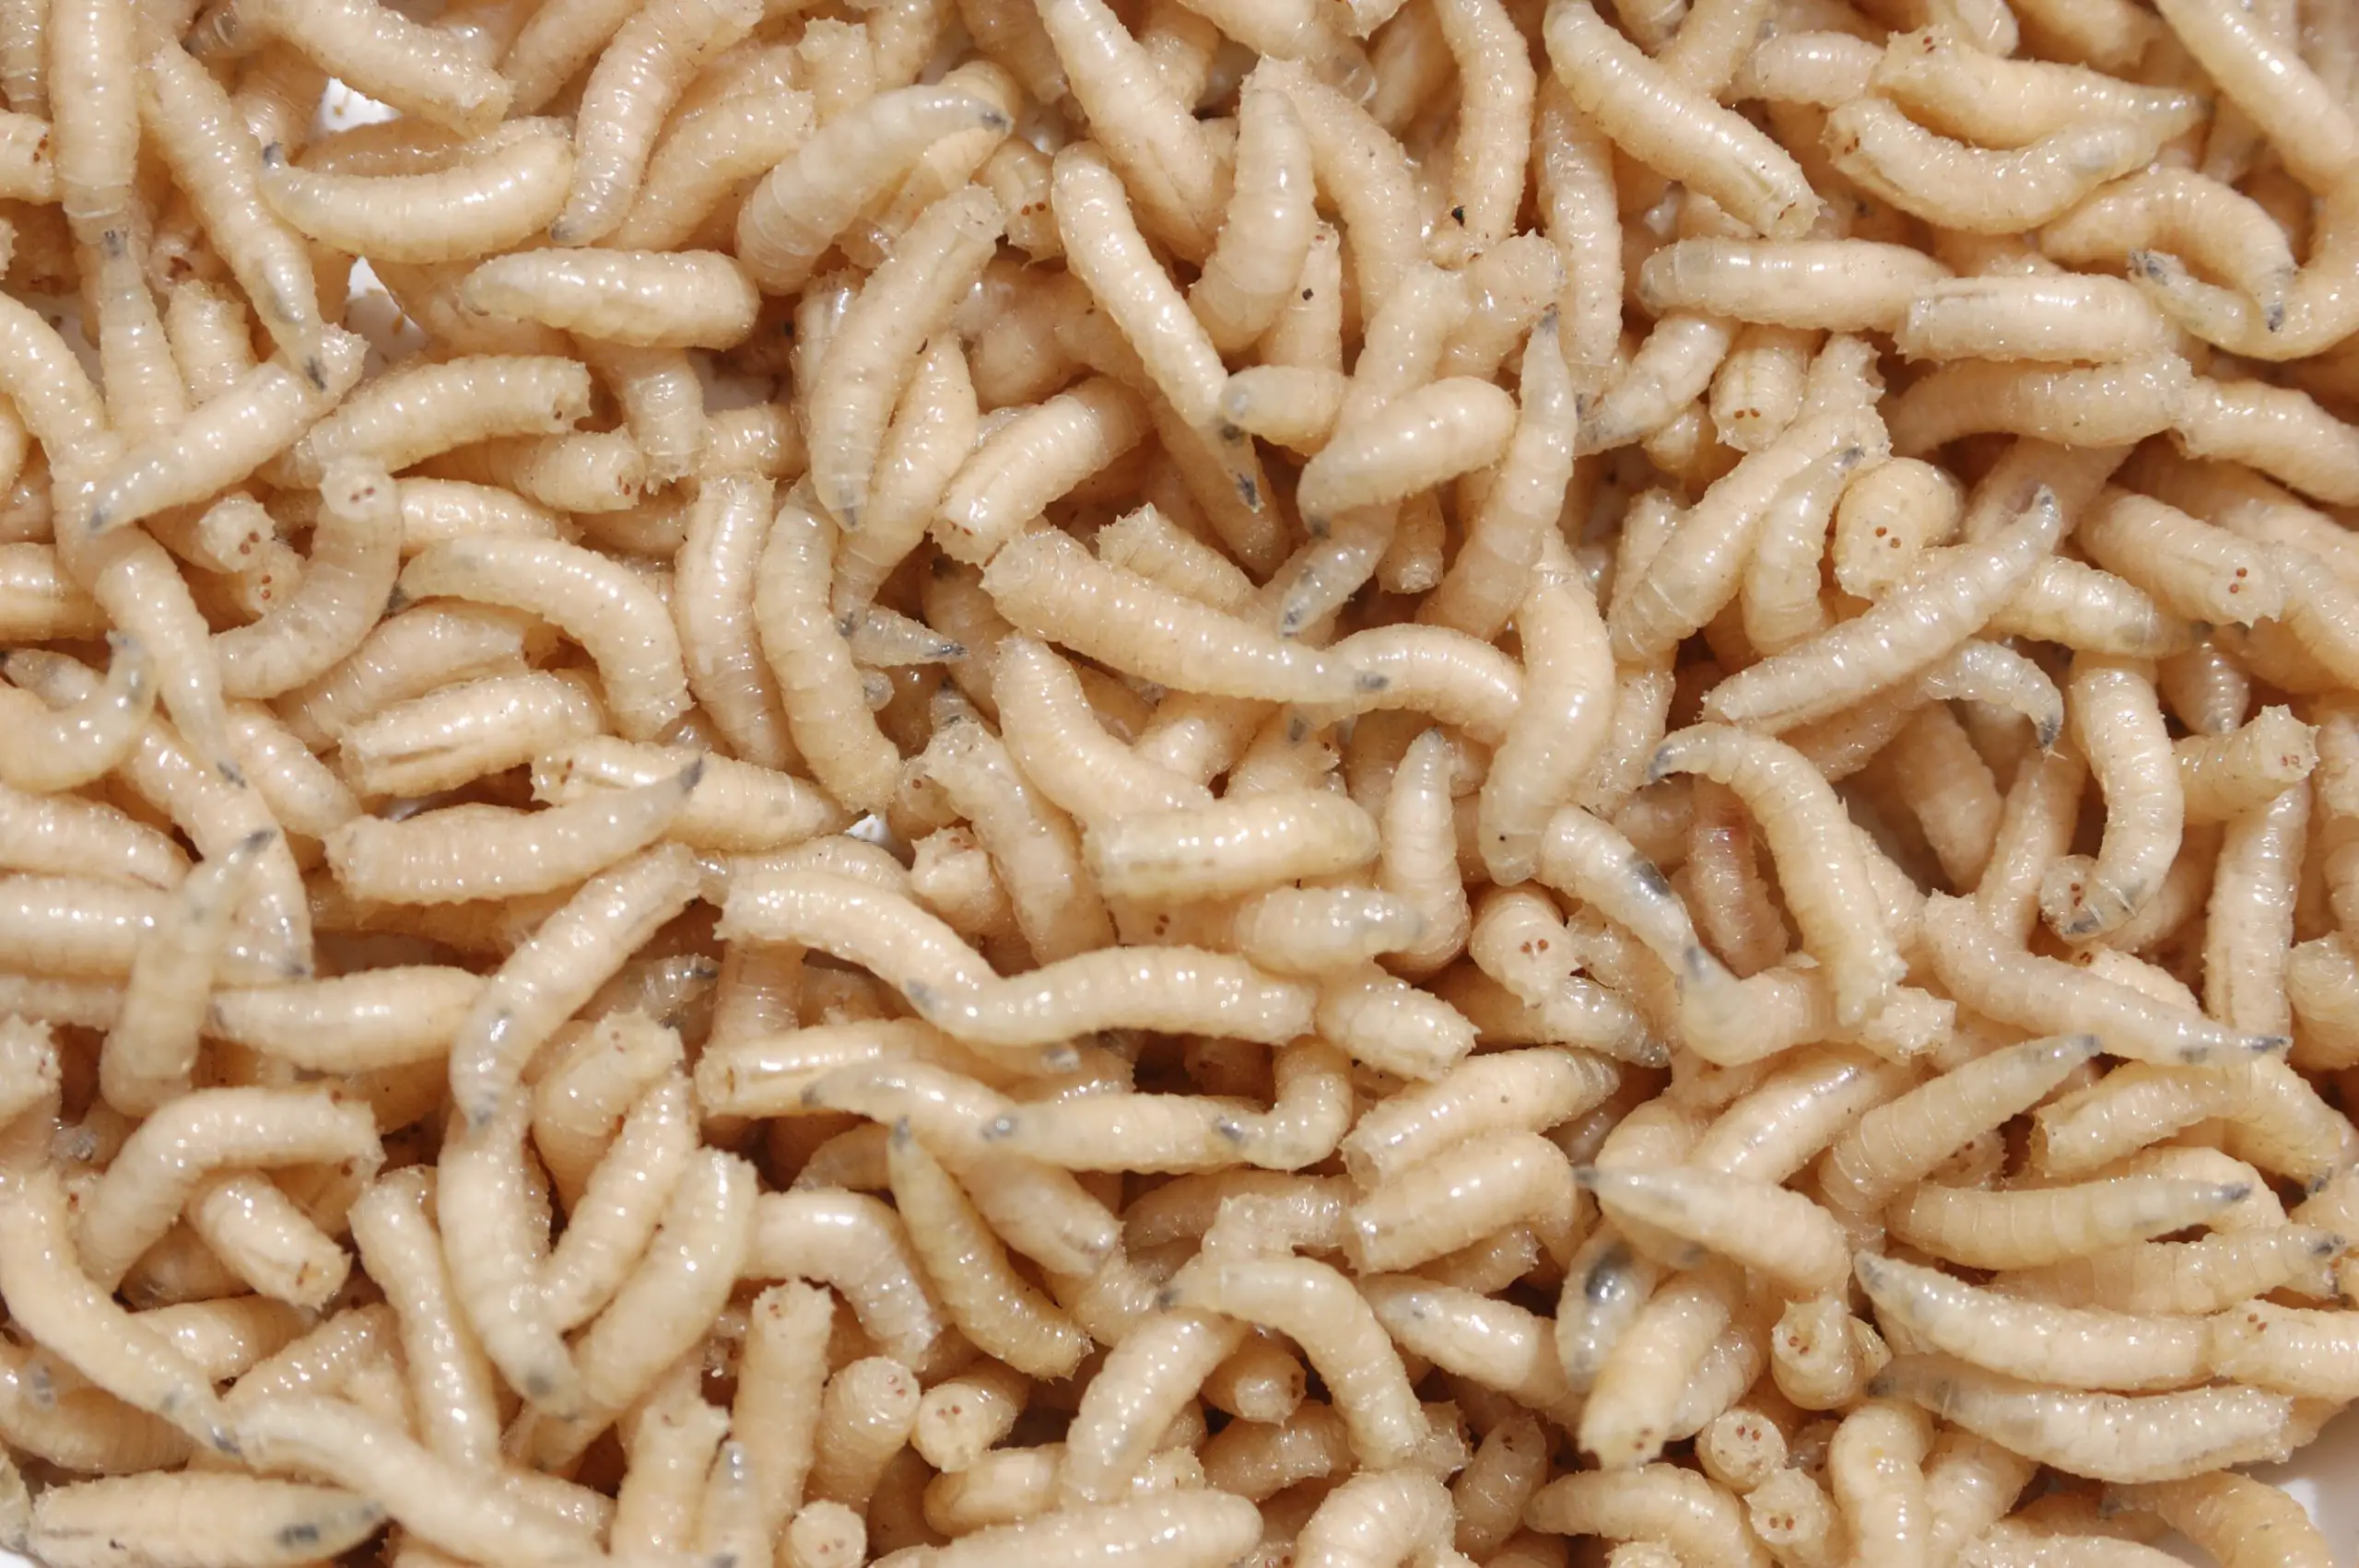 common questions about maggots